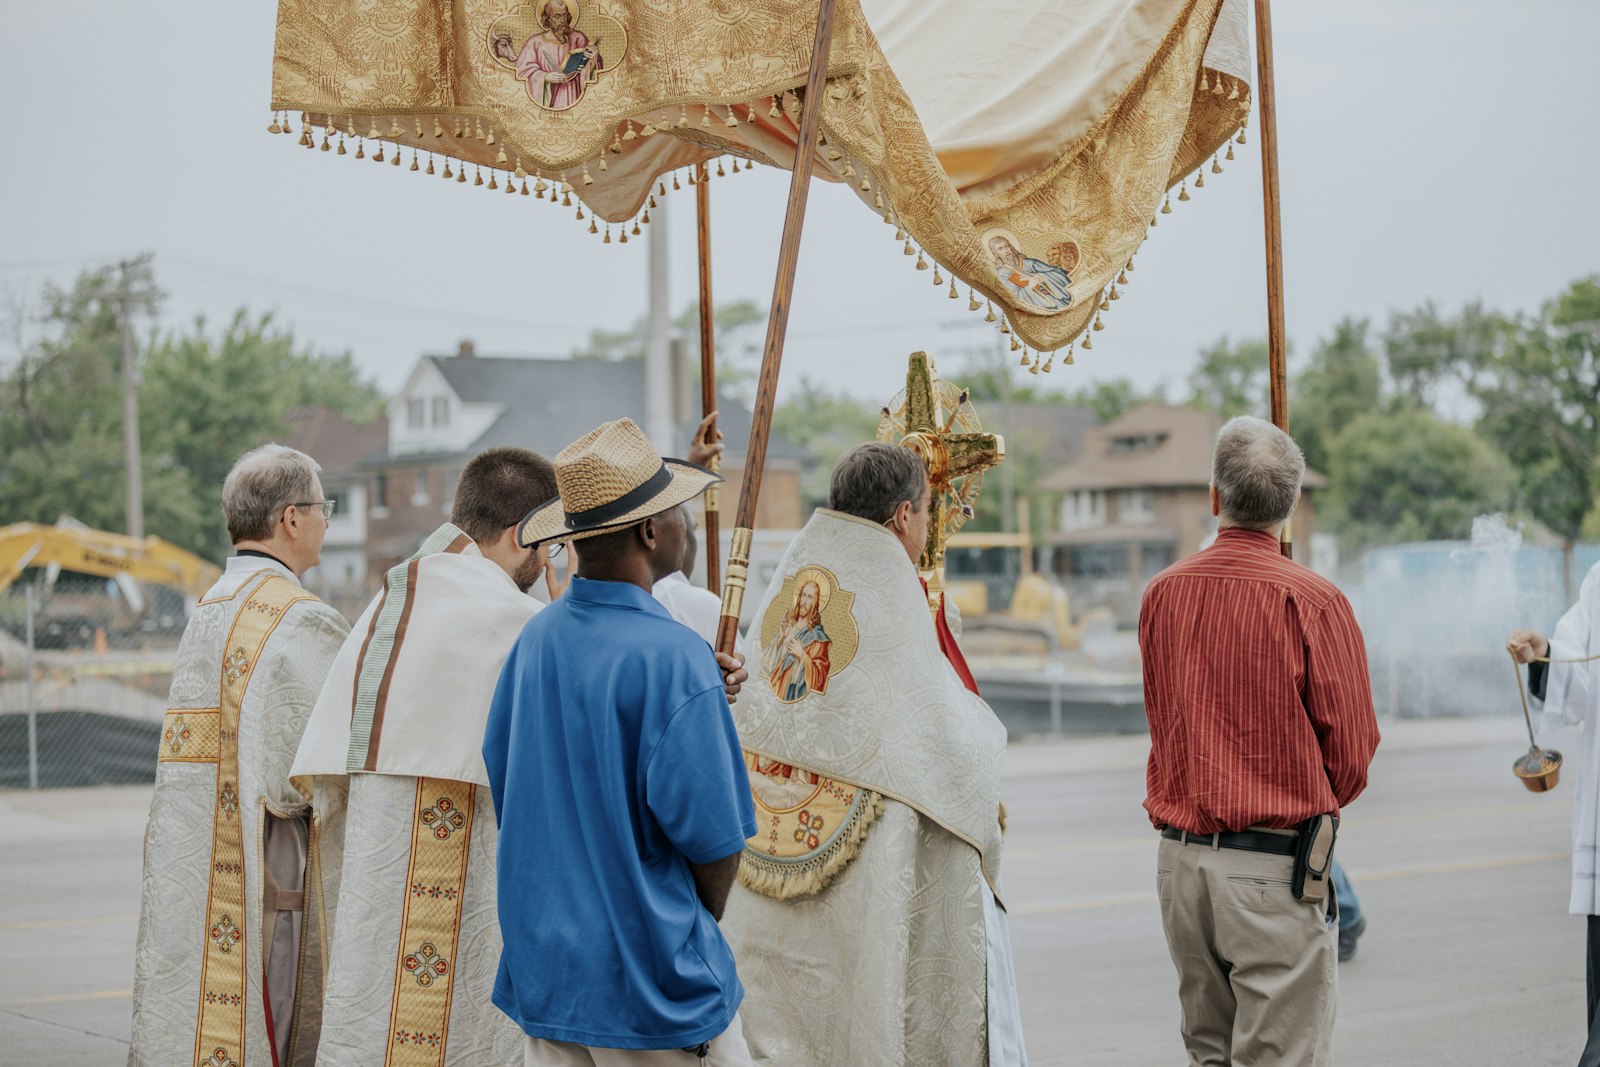 Archbishop Vigneron holds the monstrance containing the Eucharistic Jesus as the procession passes by the construction site of the Cathedral Arts Apartments, a new venture that will build 53 affordable housing units for Detroit's low-income residents across the street from the Cathedral of the Most Blessed Sacrament. (Alissa Tuttle | Special to Detroit Catholic)